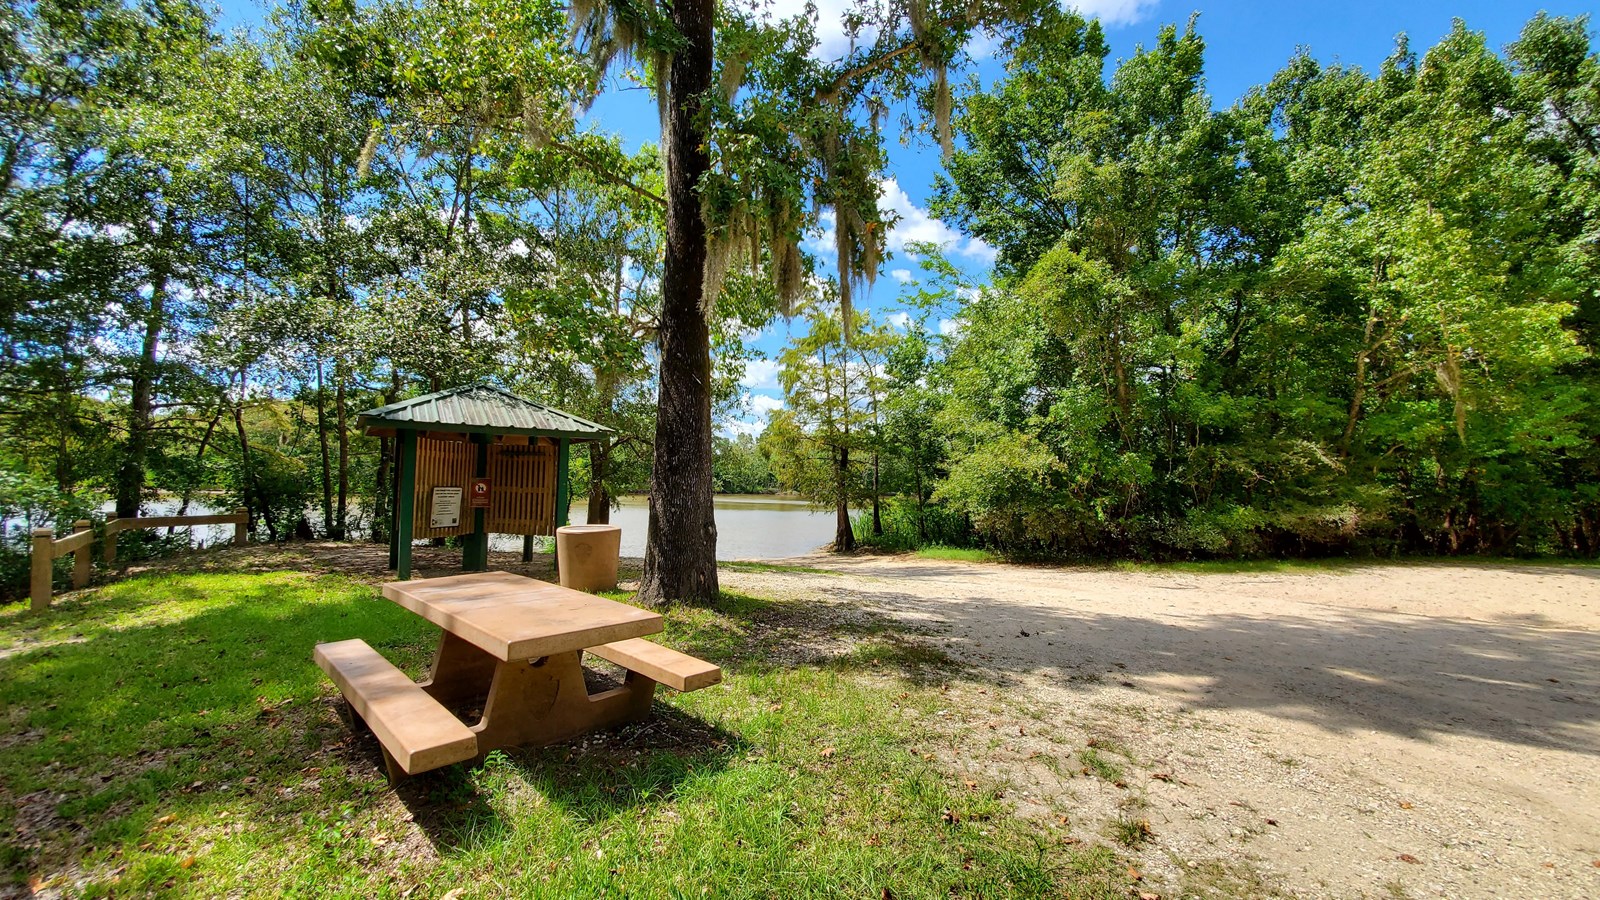 picnic table, trash can, and info kiosk next to dirt parking area and boat ramp